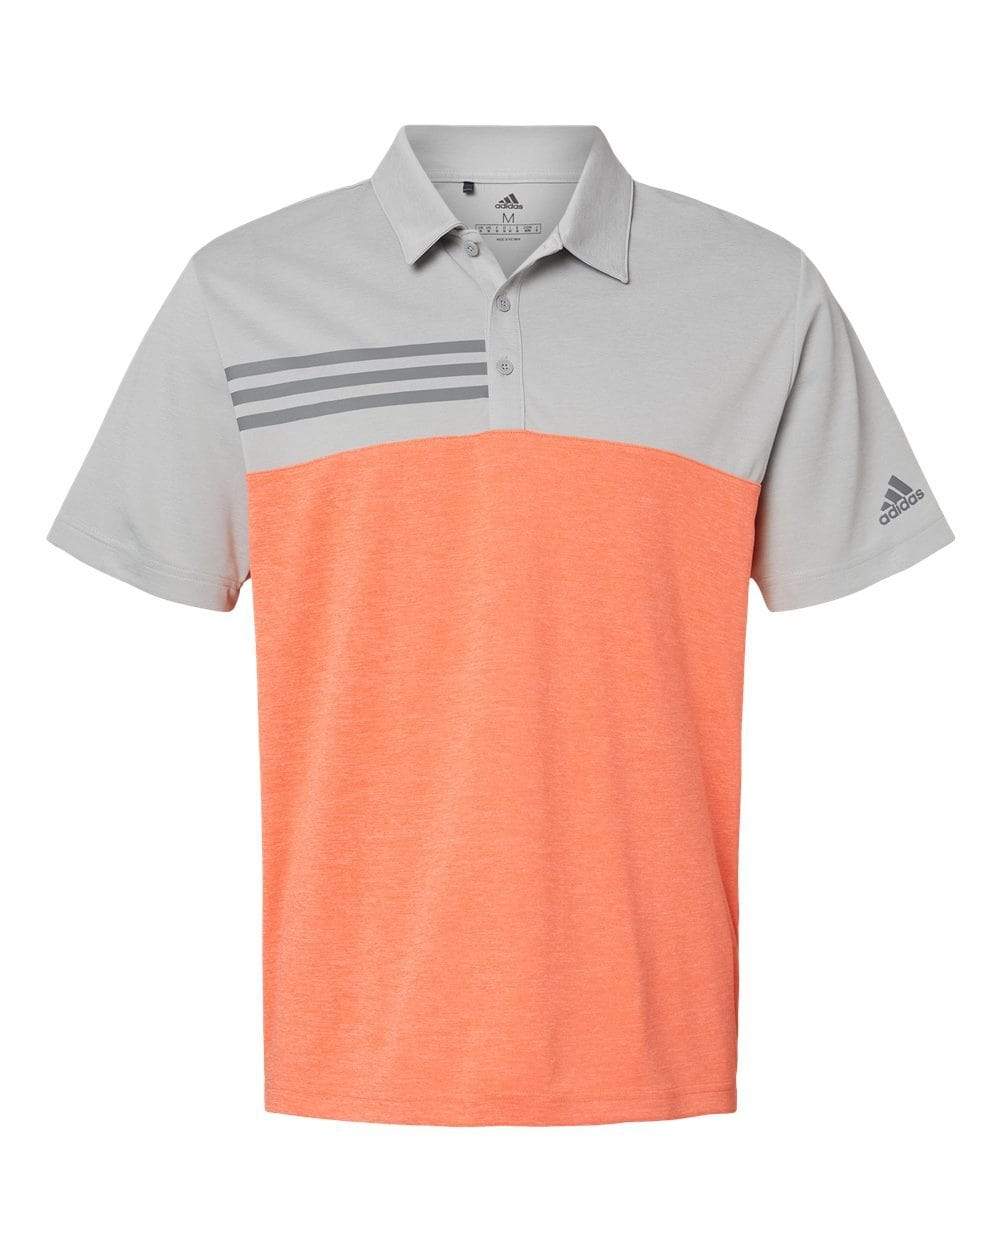 Adidas Polos S / Grey Two Heather/Hi-Res Coral Heather adidas - Men's Heathered 3-Stripes Polo